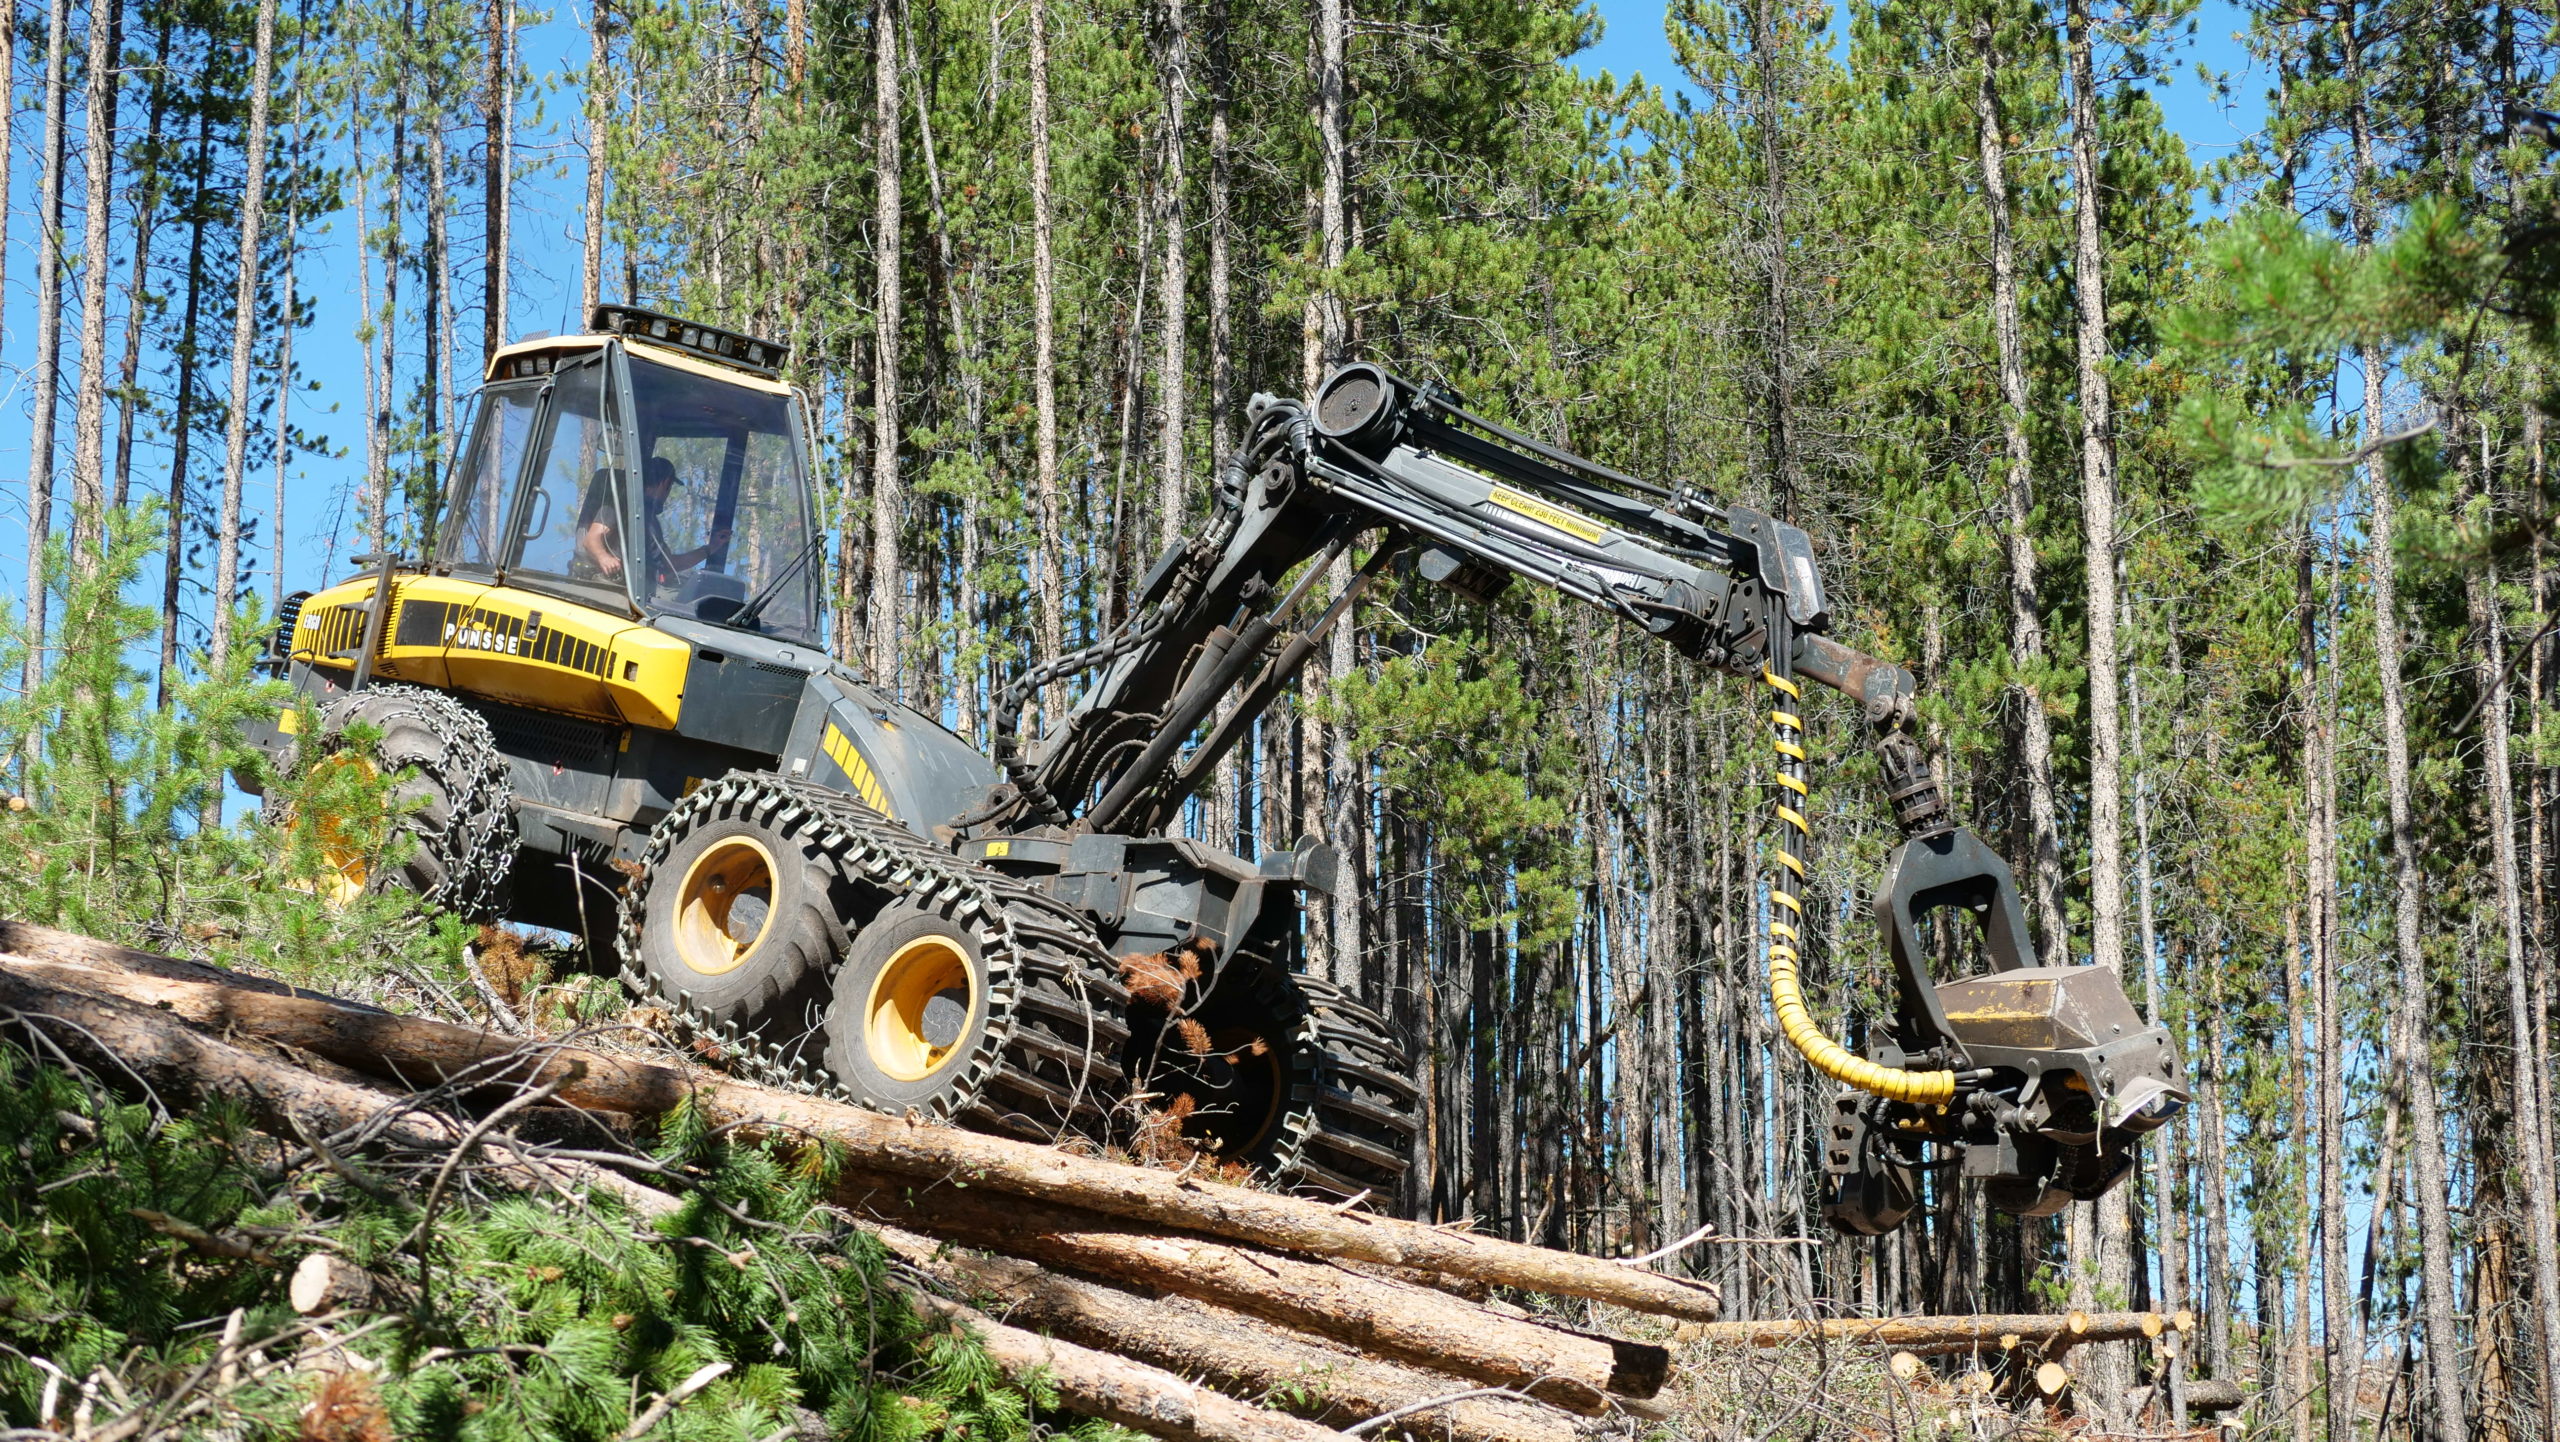 A Ponsse tree harvester works to thin a 40-acre section of forest in Breckenridge in August, 2020. Photo credit: Denver Water.